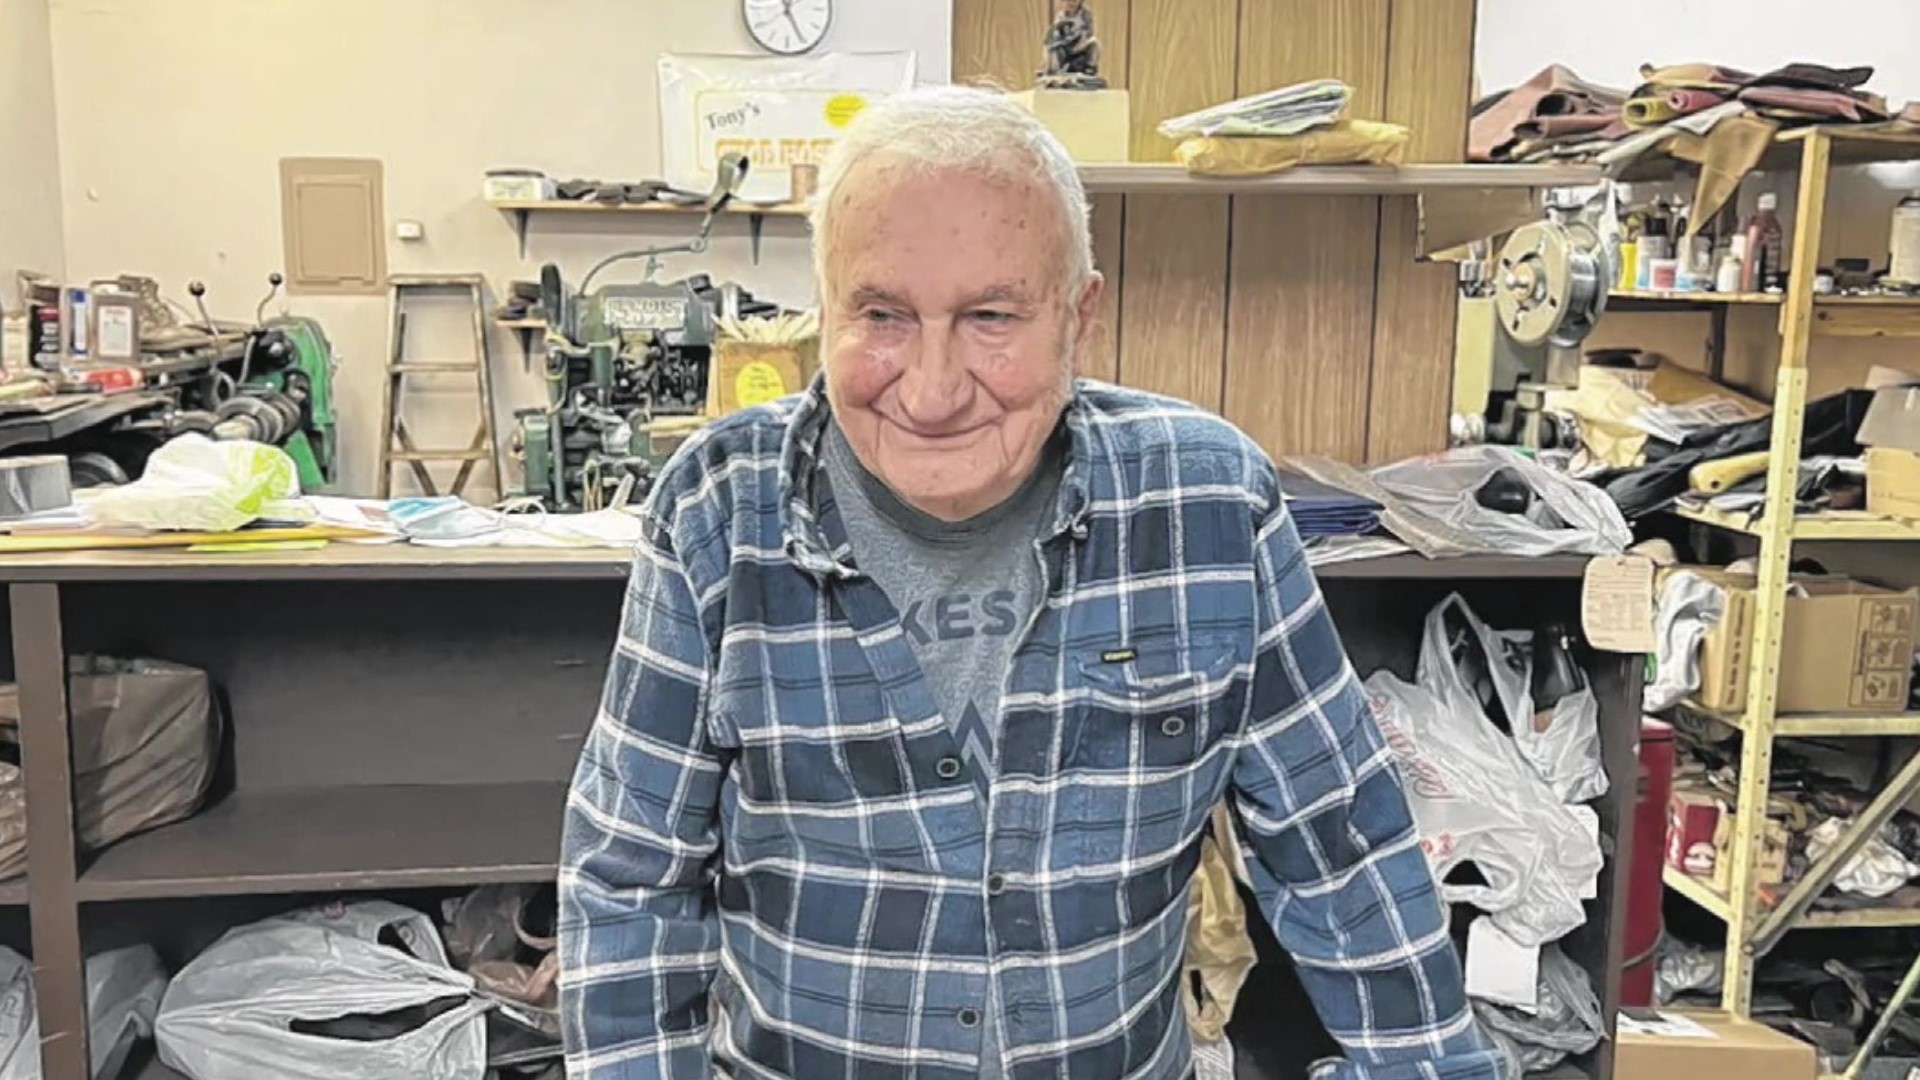 Tony passed away overnight in his sleep at the age of 91. This was to be his last week running his shoe repair shop in Wilkes-Barre before retirement.